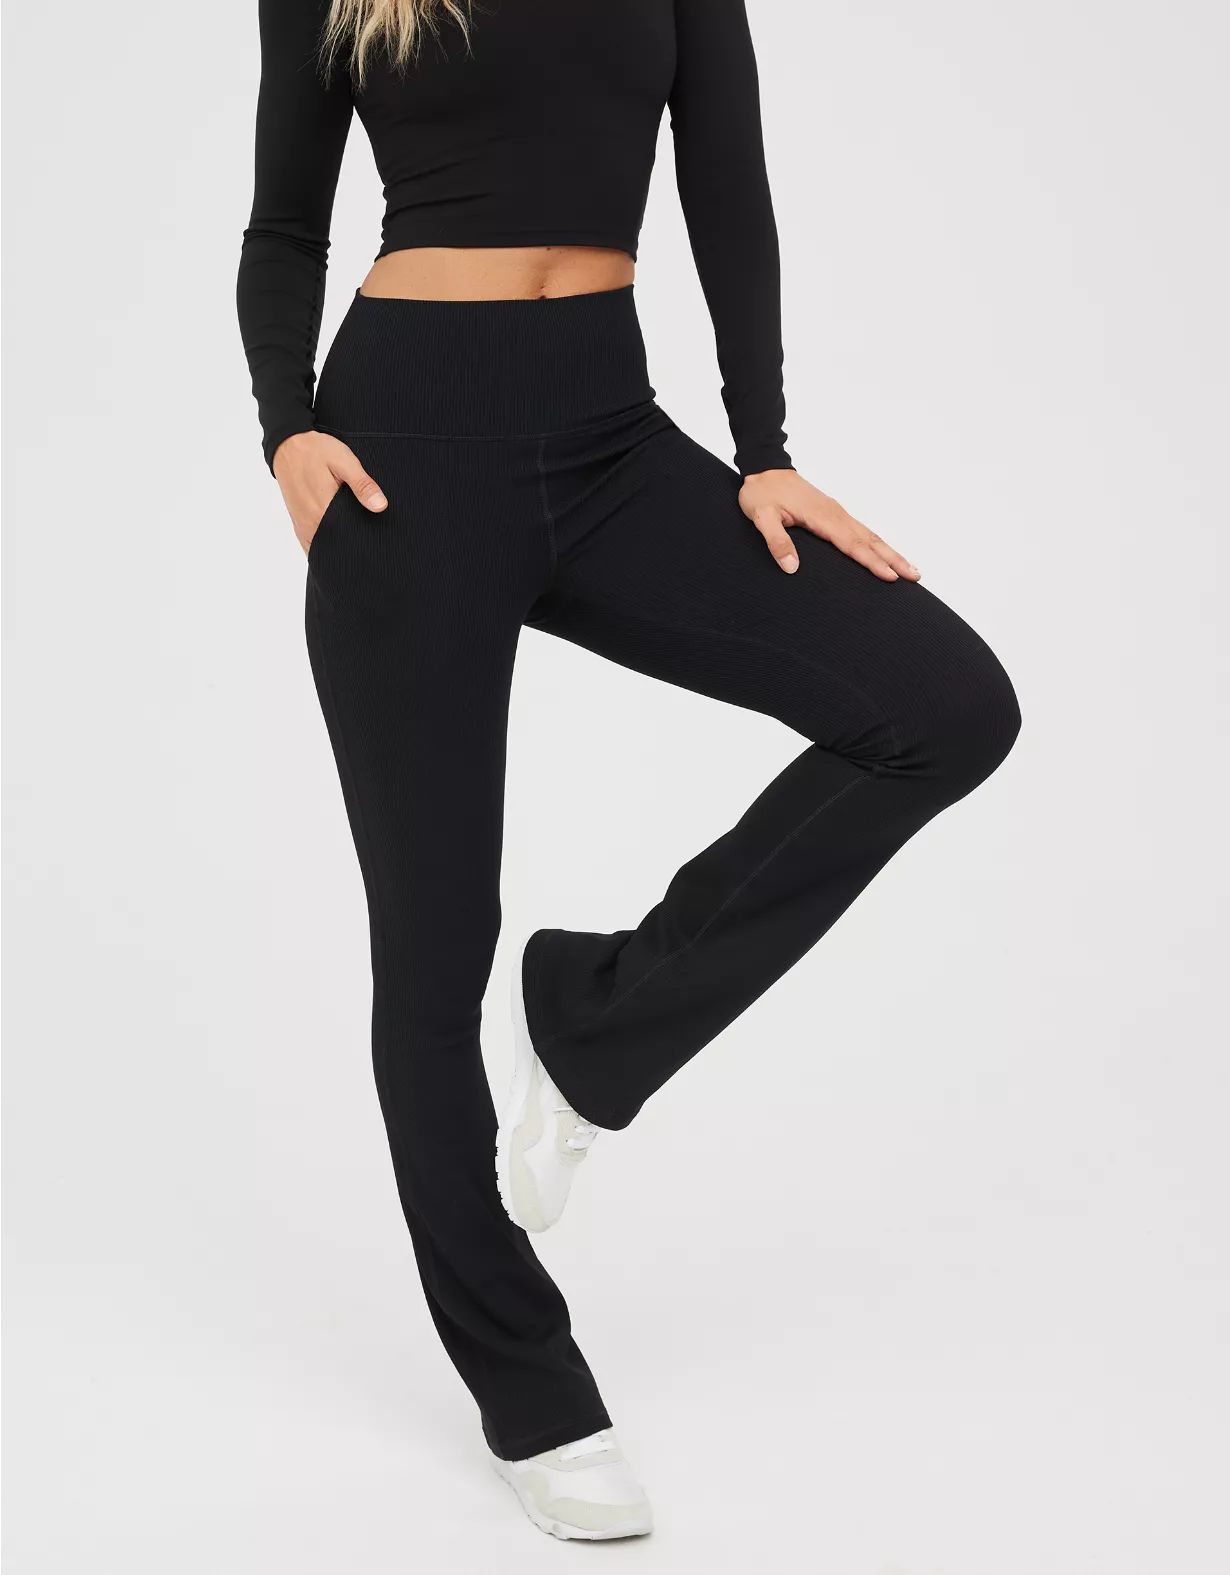 OFFLINE By Aerie Ribbed Bootcut Legging | Aerie